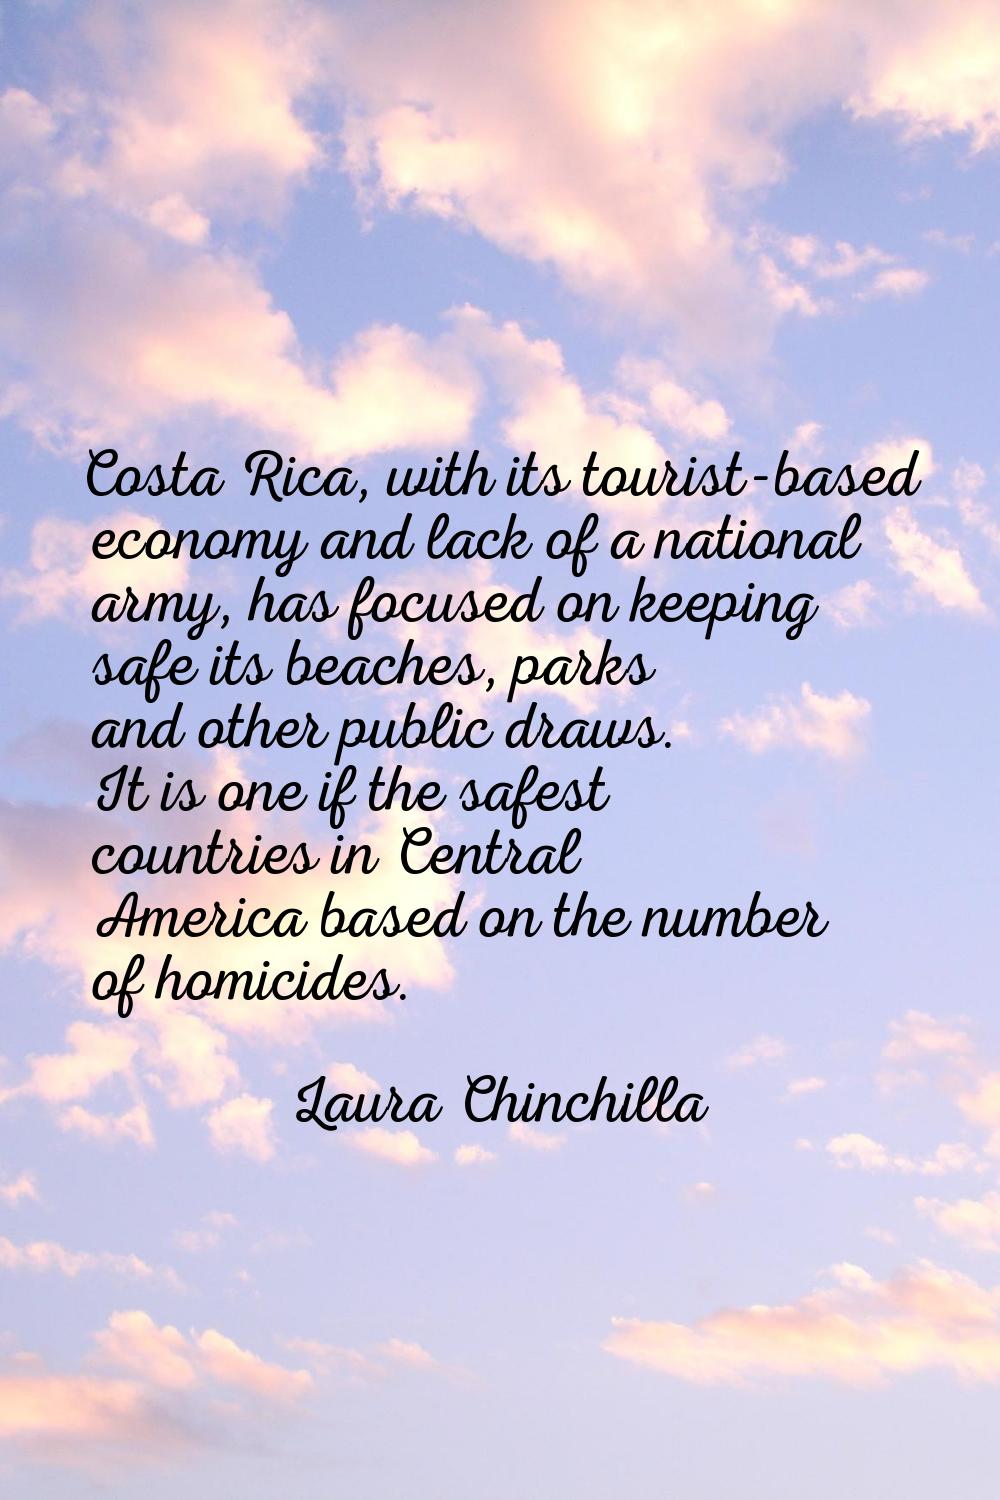 Costa Rica, with its tourist-based economy and lack of a national army, has focused on keeping safe